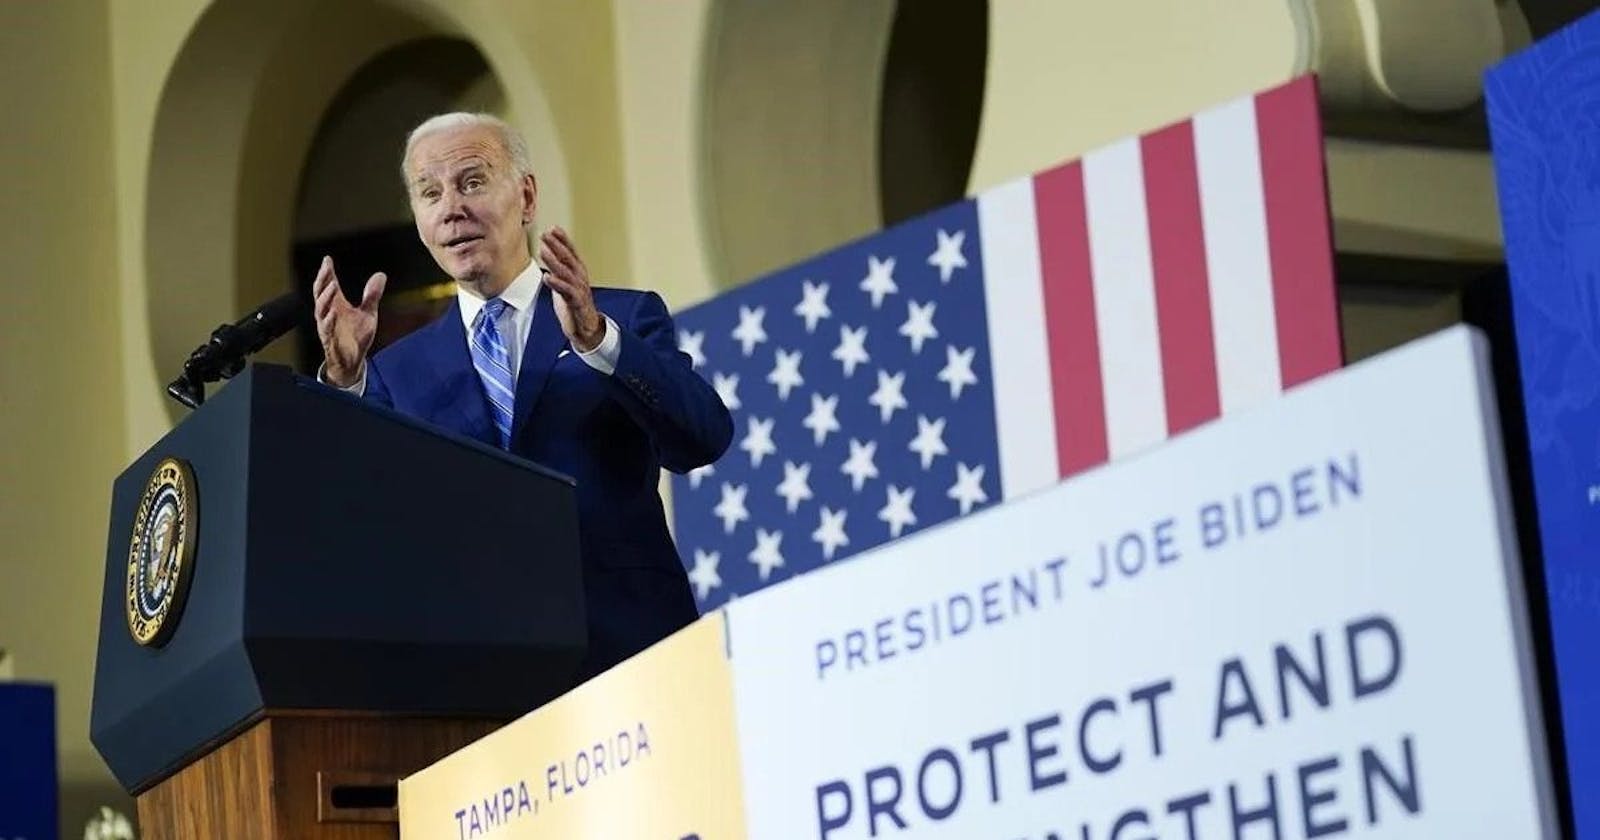 Joe Biden to come to North Carolina and run strong on their record